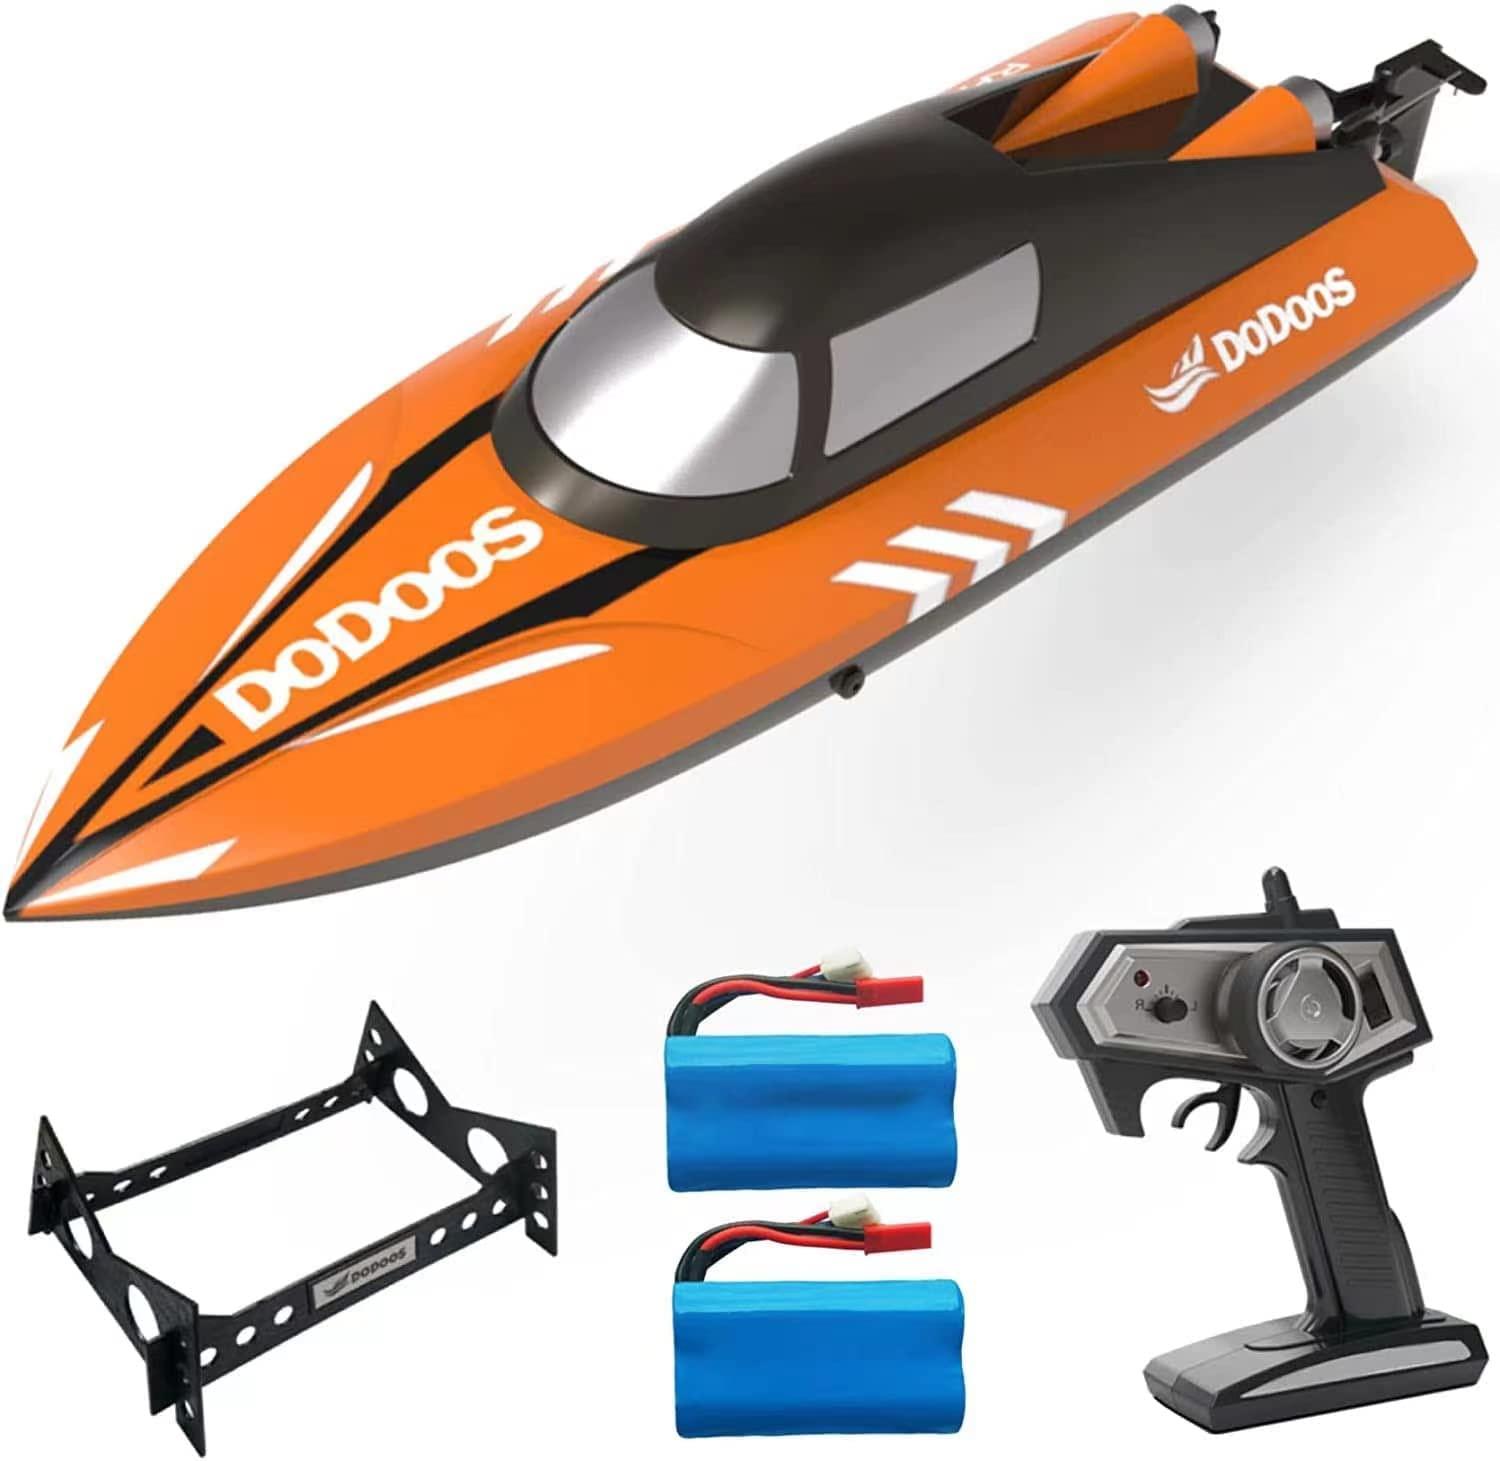 Dodoos Rc Boat: Easy to Operate and User-Friendly for All Ages